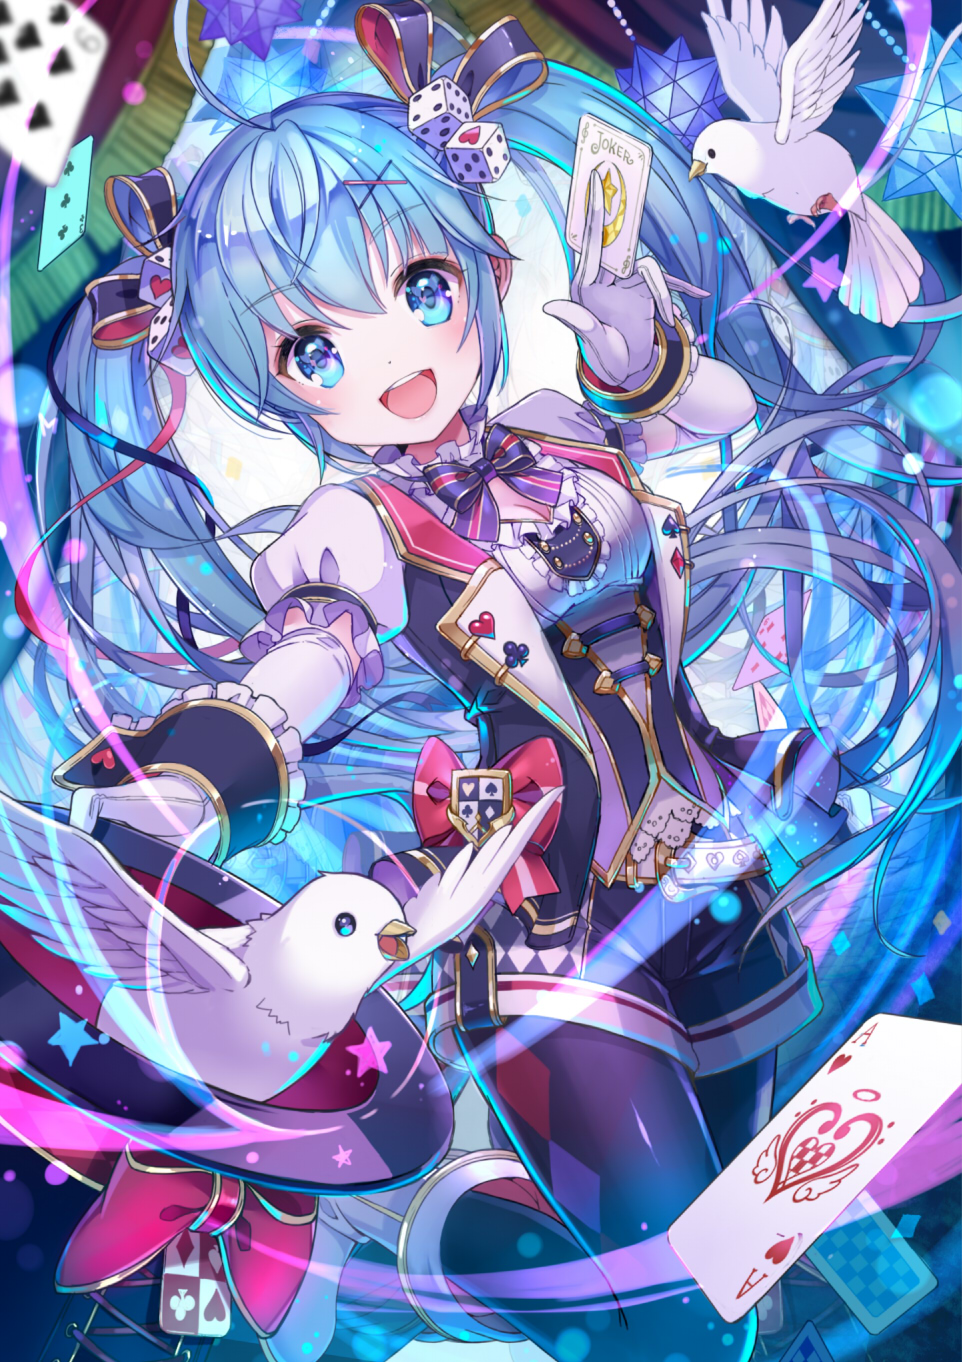 1girl argyle argyle_legwear bird card clubs_(playing_card) diamonds_(playing_card) dice_hair_ornament dove gloves hair_ornament hat hatsune_miku heart hearts_(playing_card) highres looking_at_viewer magic_trick playing_card prism ribbon shiori_(xxxsi) shorts smile spades_(playing_card) star tagme twintails vocaloid white_gloves